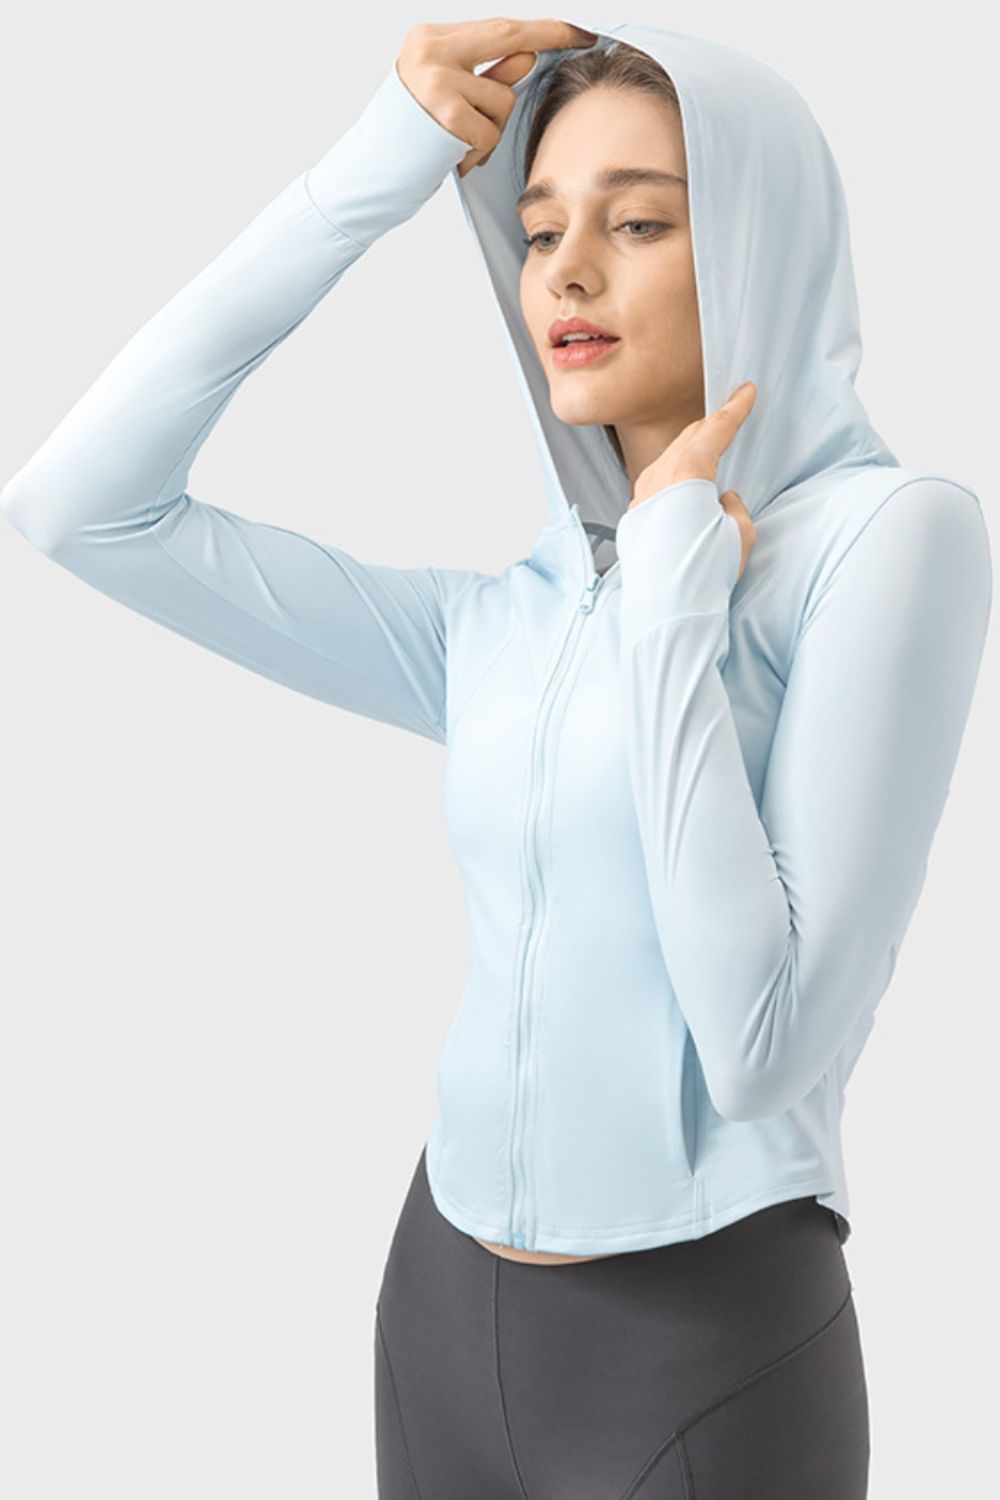 Pocketed Zip Up Hooded Long Sleeve Active Outerwear